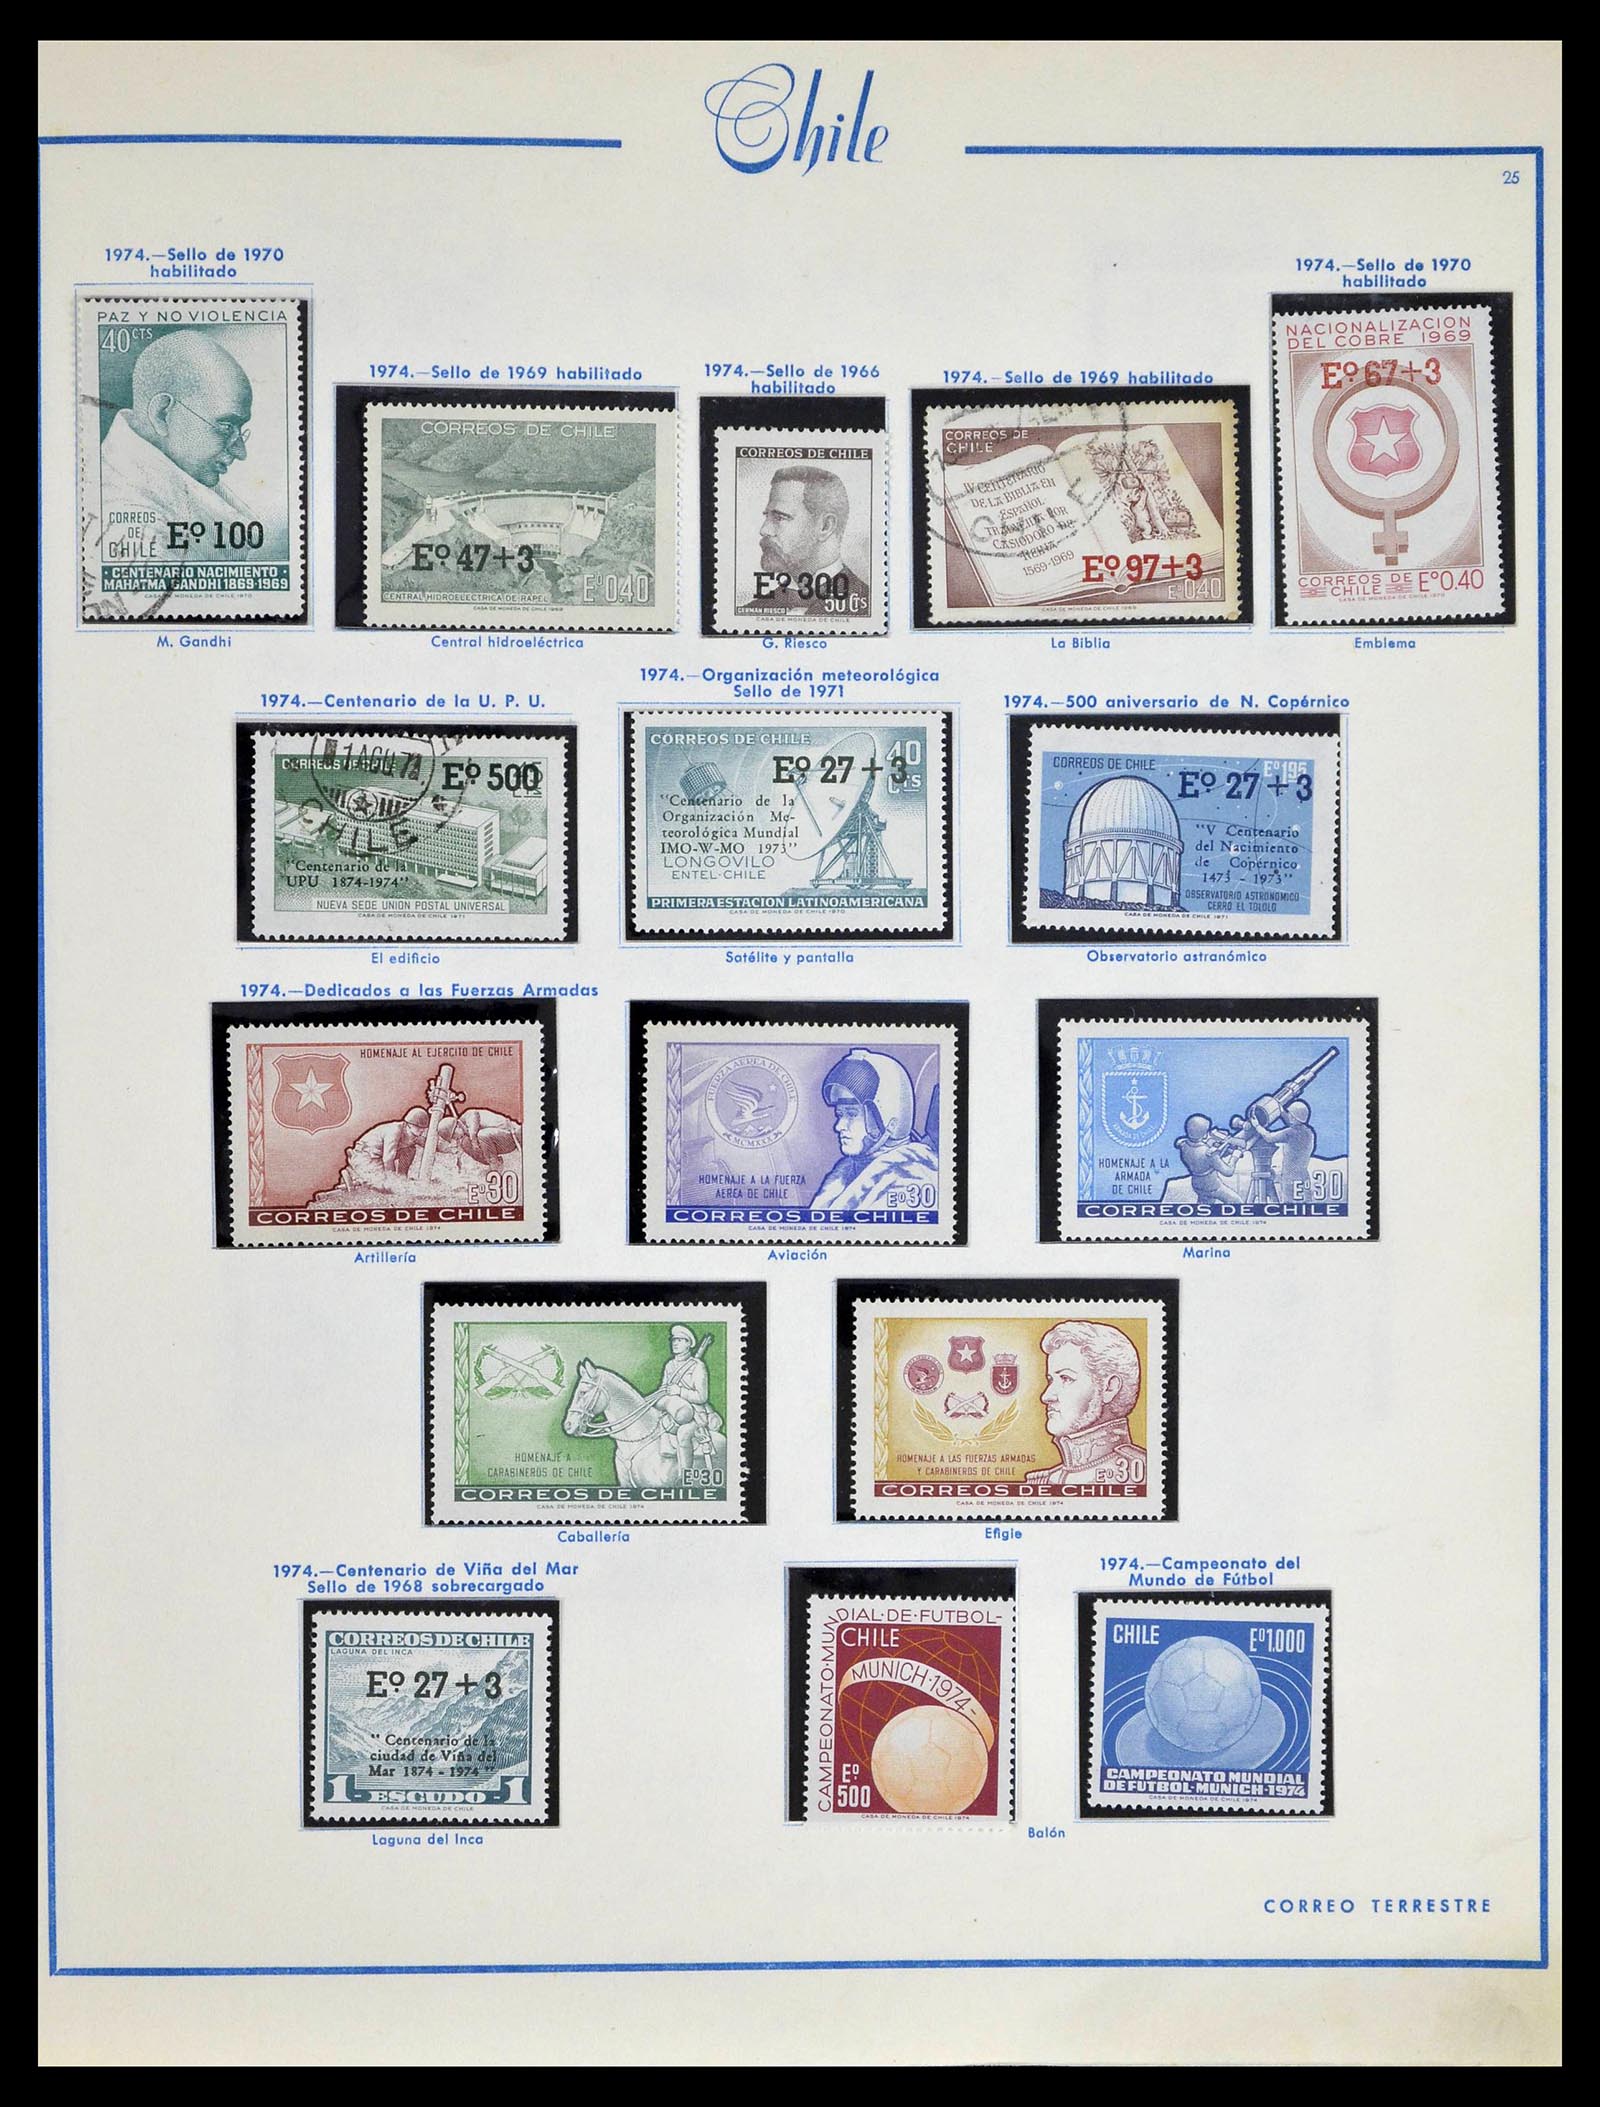 39213 0032 - Stamp collection 39213 Chile 1853-1970.